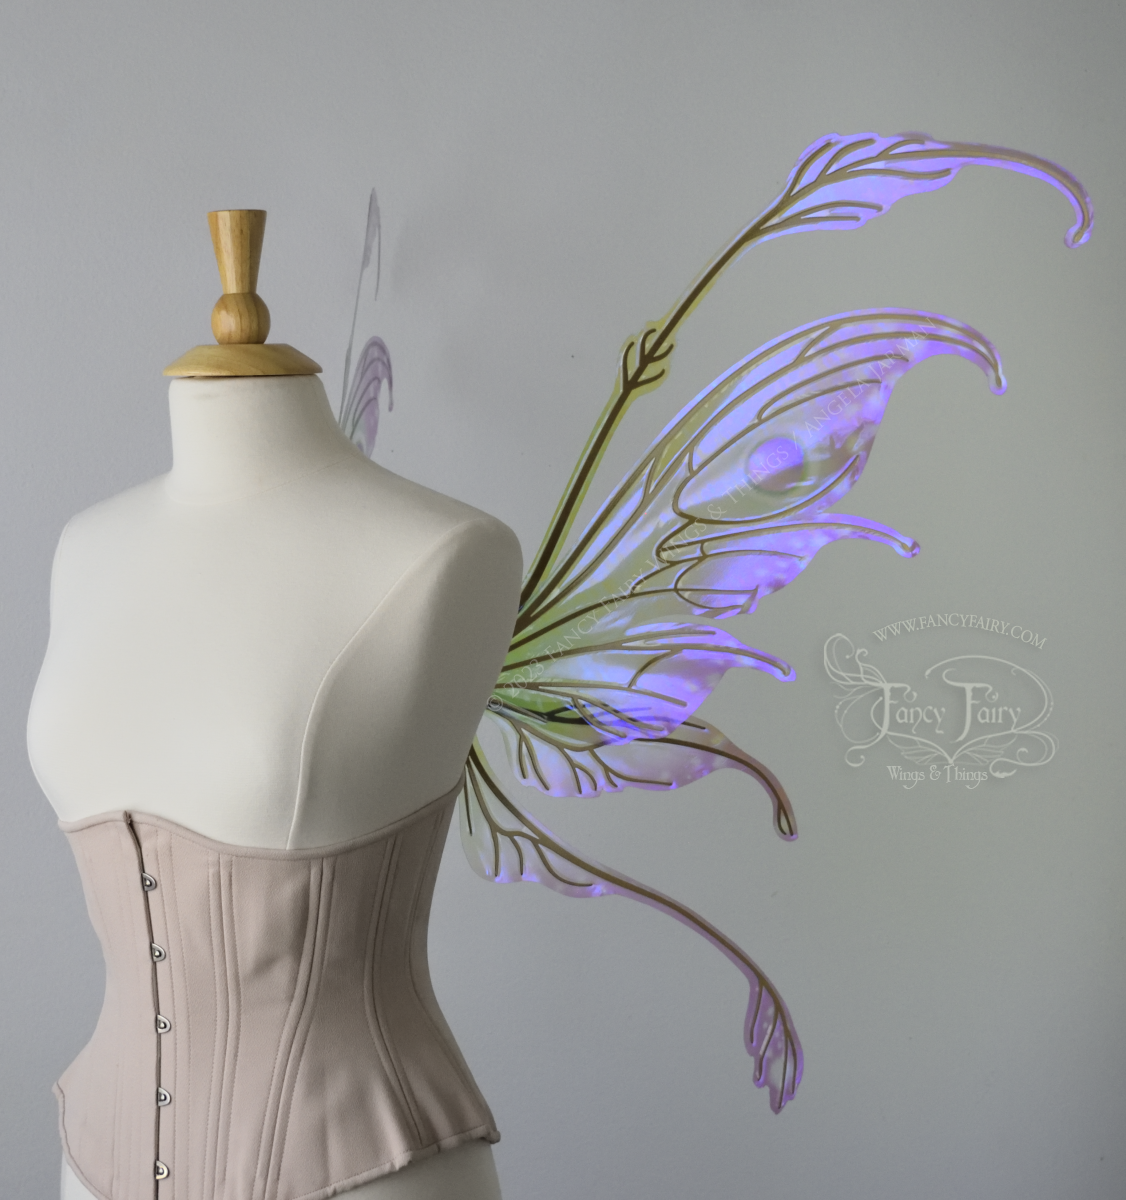 Right side view of a dress form wearing an underbust corset & 'Fauna' transparent pink, violet & green iridescent fairy wings with downward curved tips, antennae & wispy 'tails', with gold veining